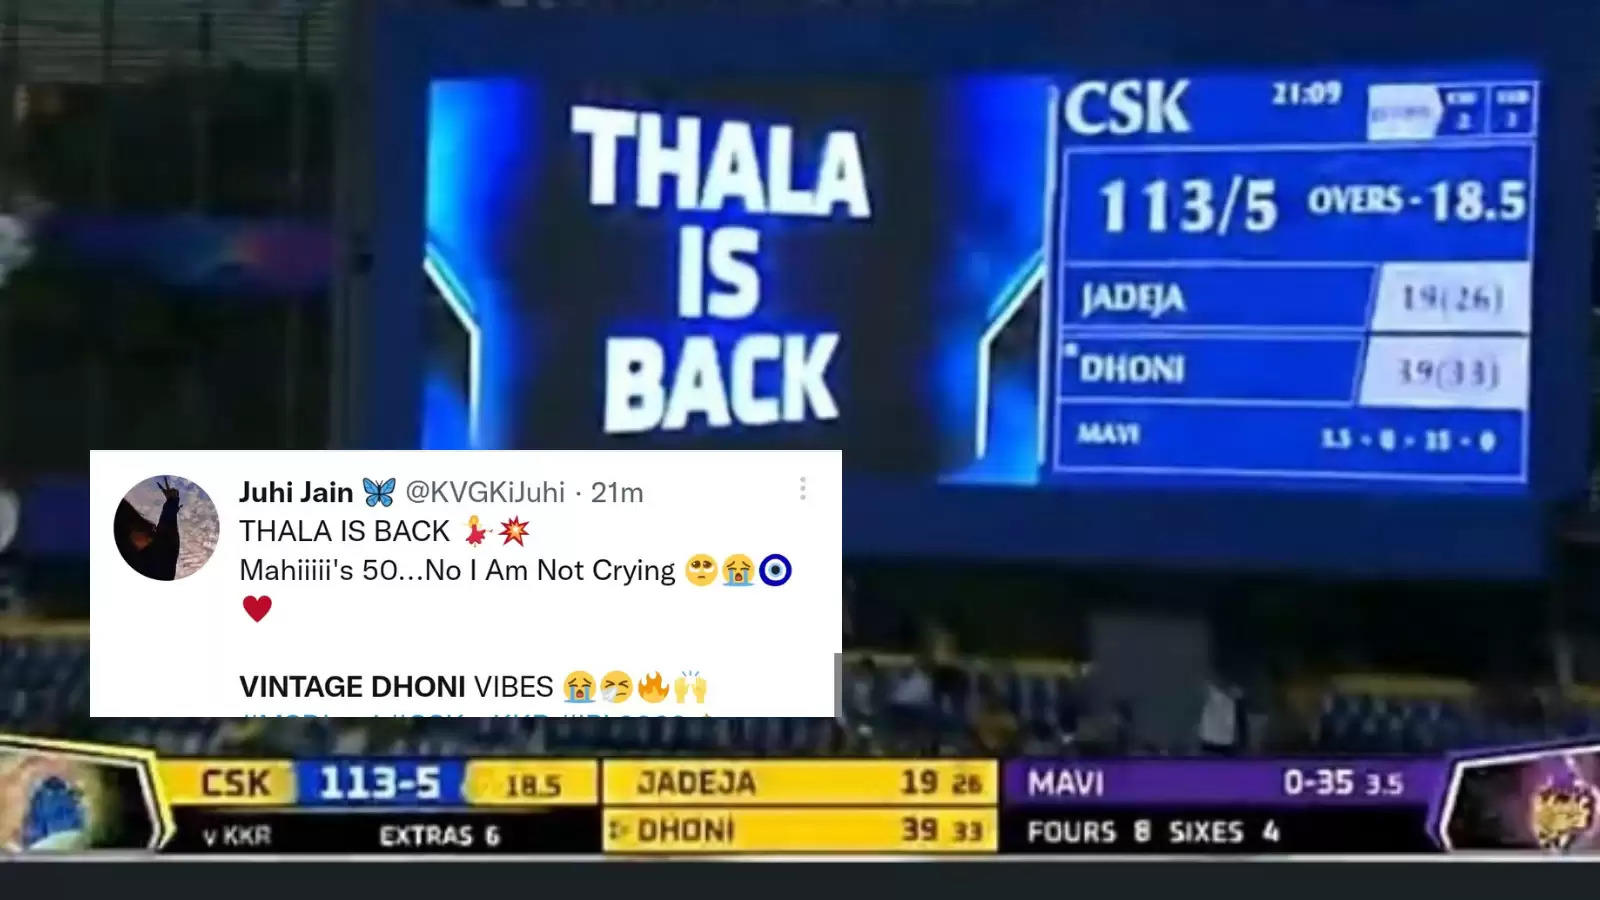 Social media reacts to MS Dhoni and his vintage fifty in IPL 2022 opener vs KKR